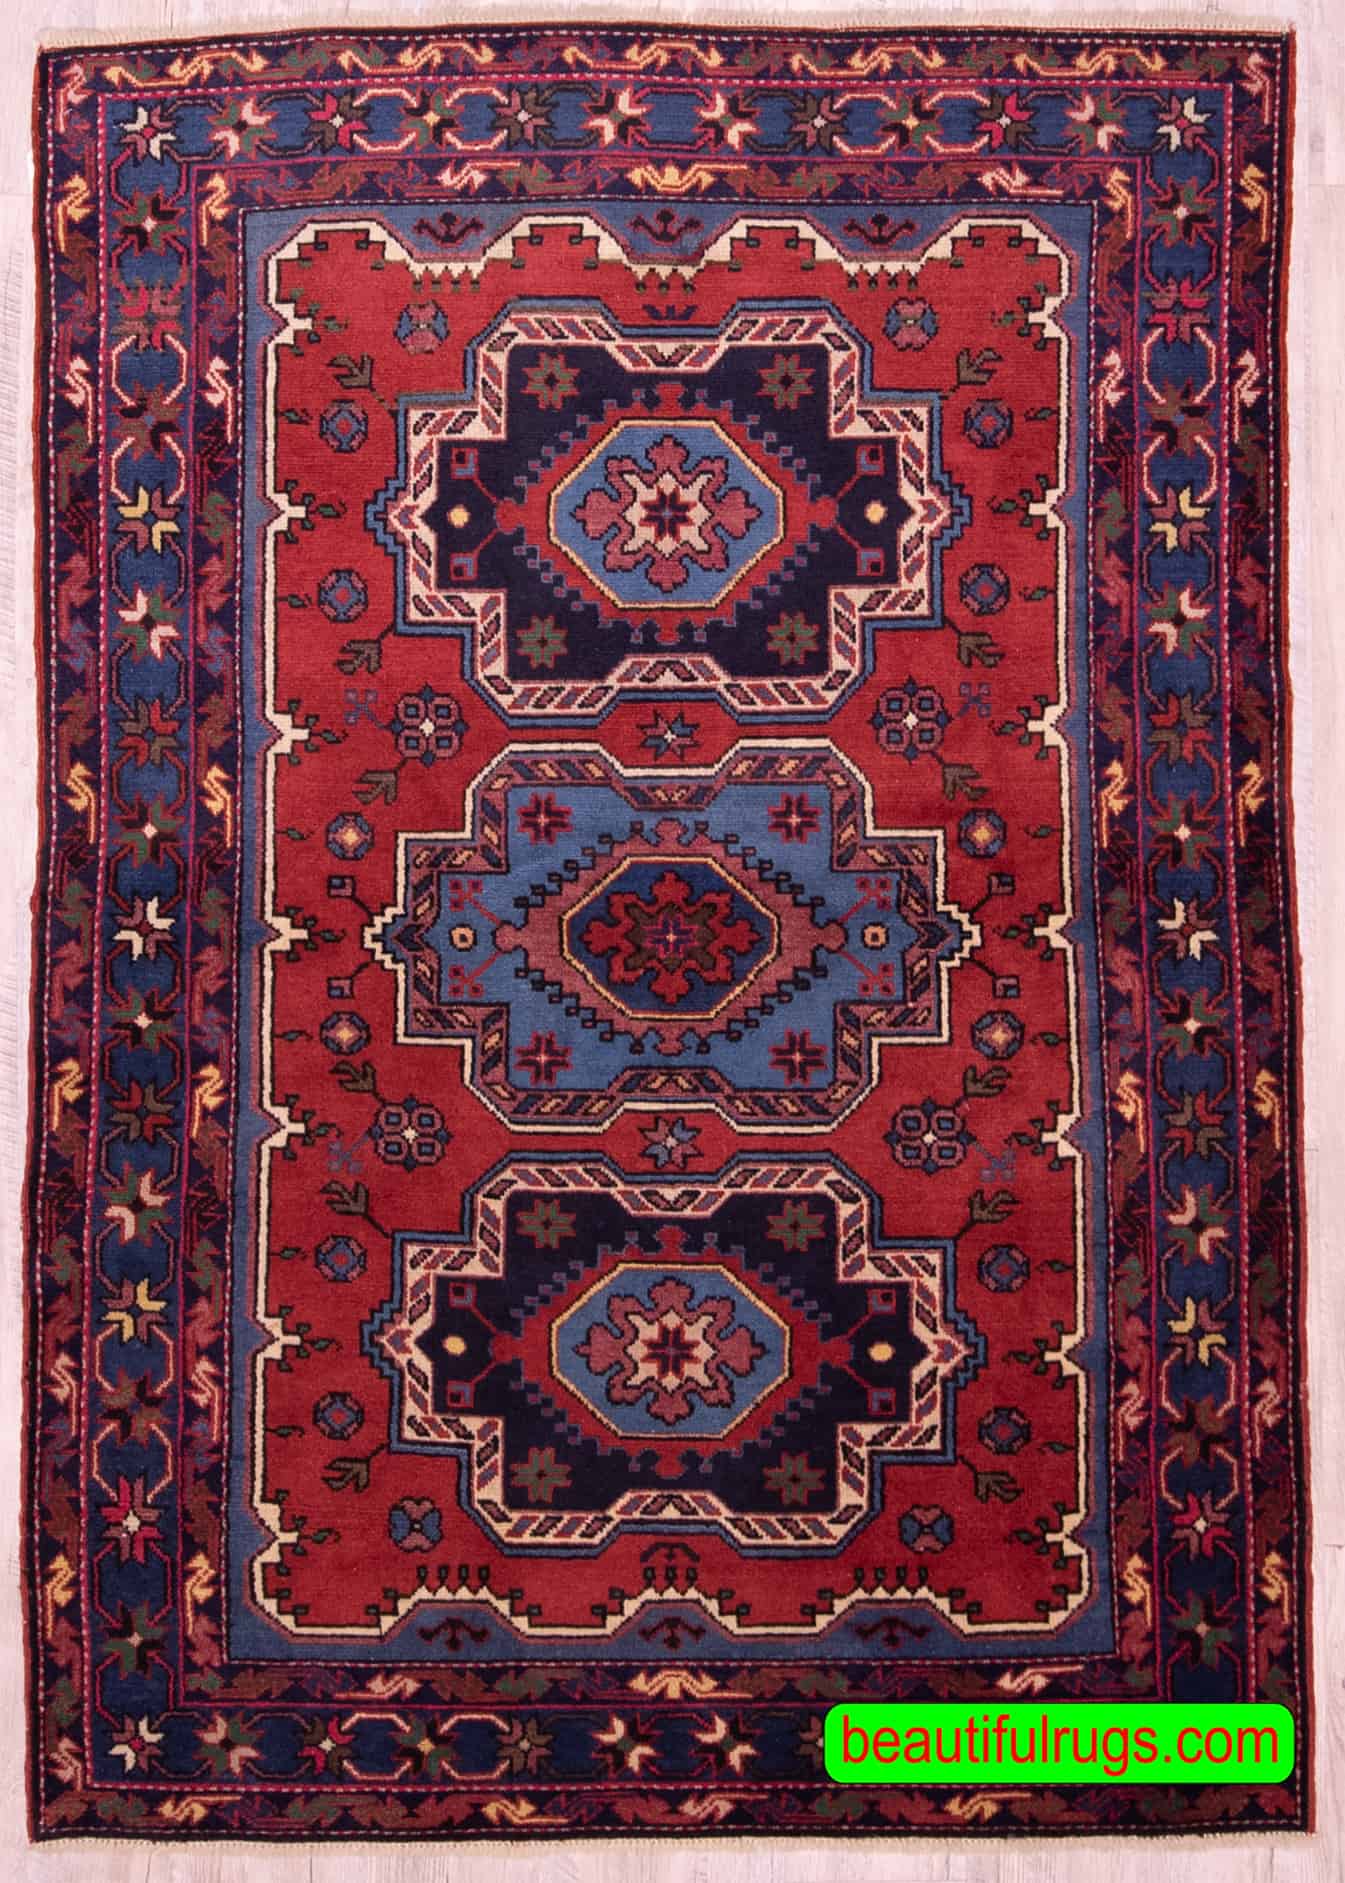 Colorful geometric style Russian rug with red and navy blue. Size 4.6x6